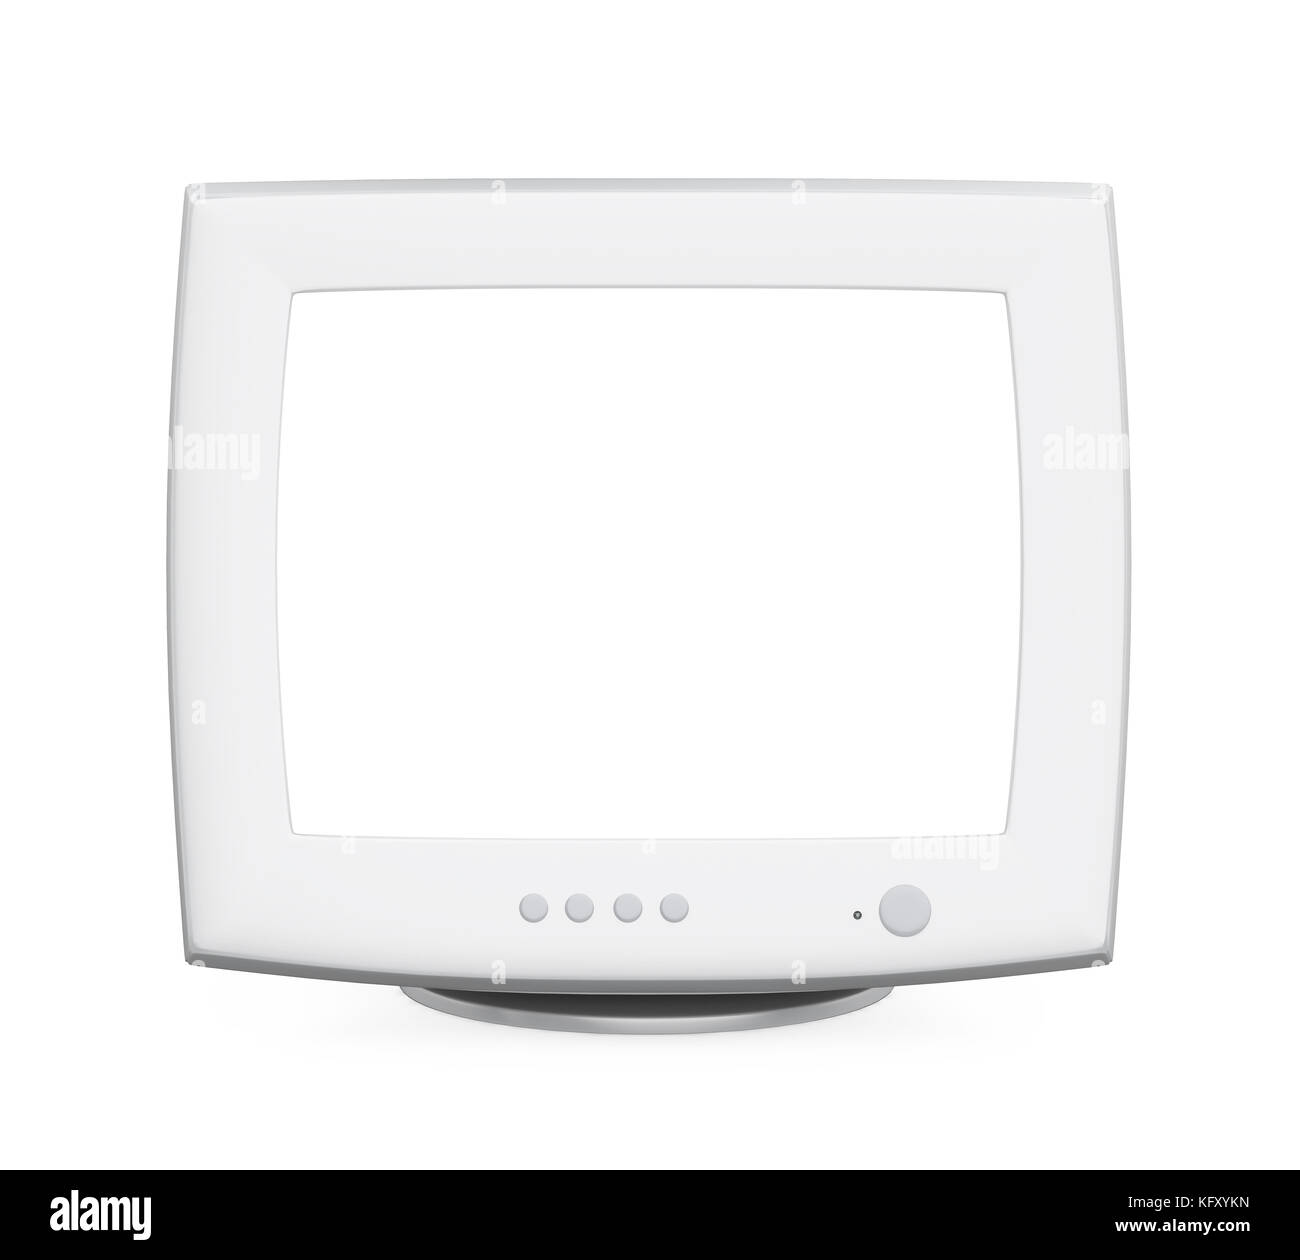 CRT Computer Monitor with Blank White Screen Isolated Stock Photo